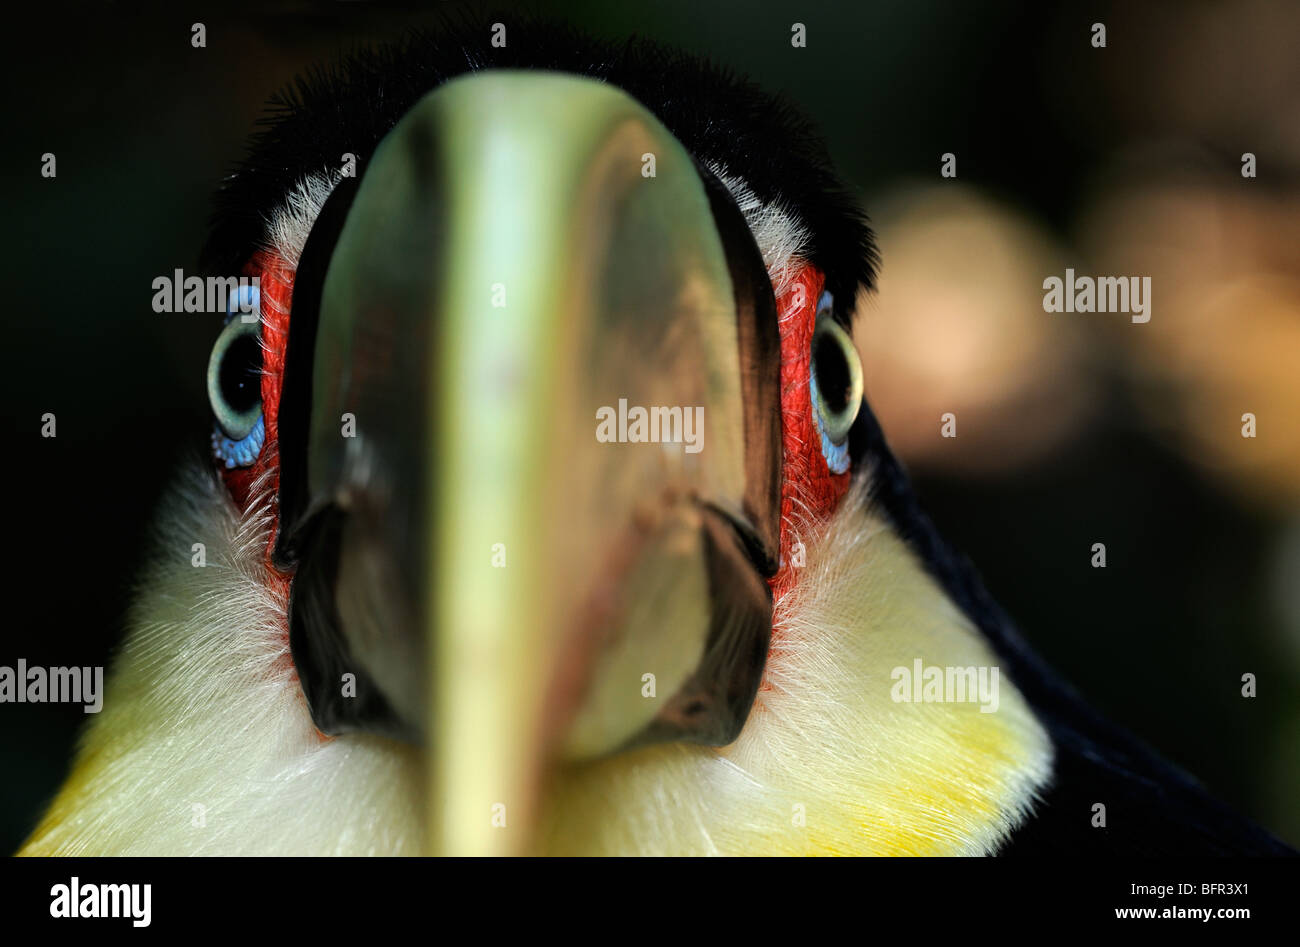 Red-breasted Toucan (Ramphastos dicolorus) close-up view, captive, Brazil. Stock Photo